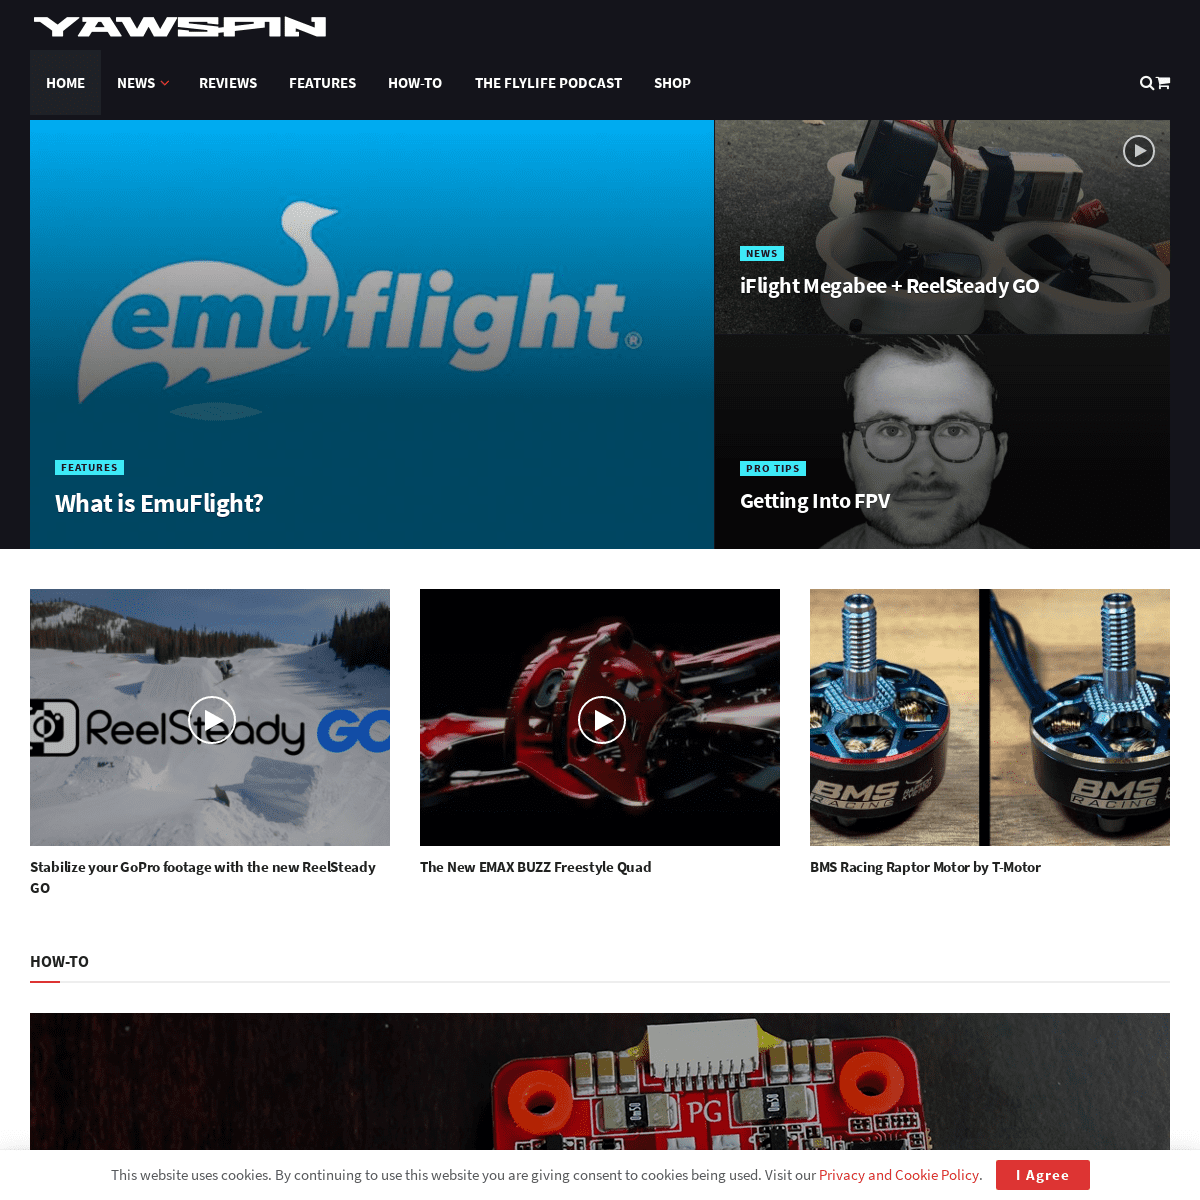 A complete backup of yawspin.com